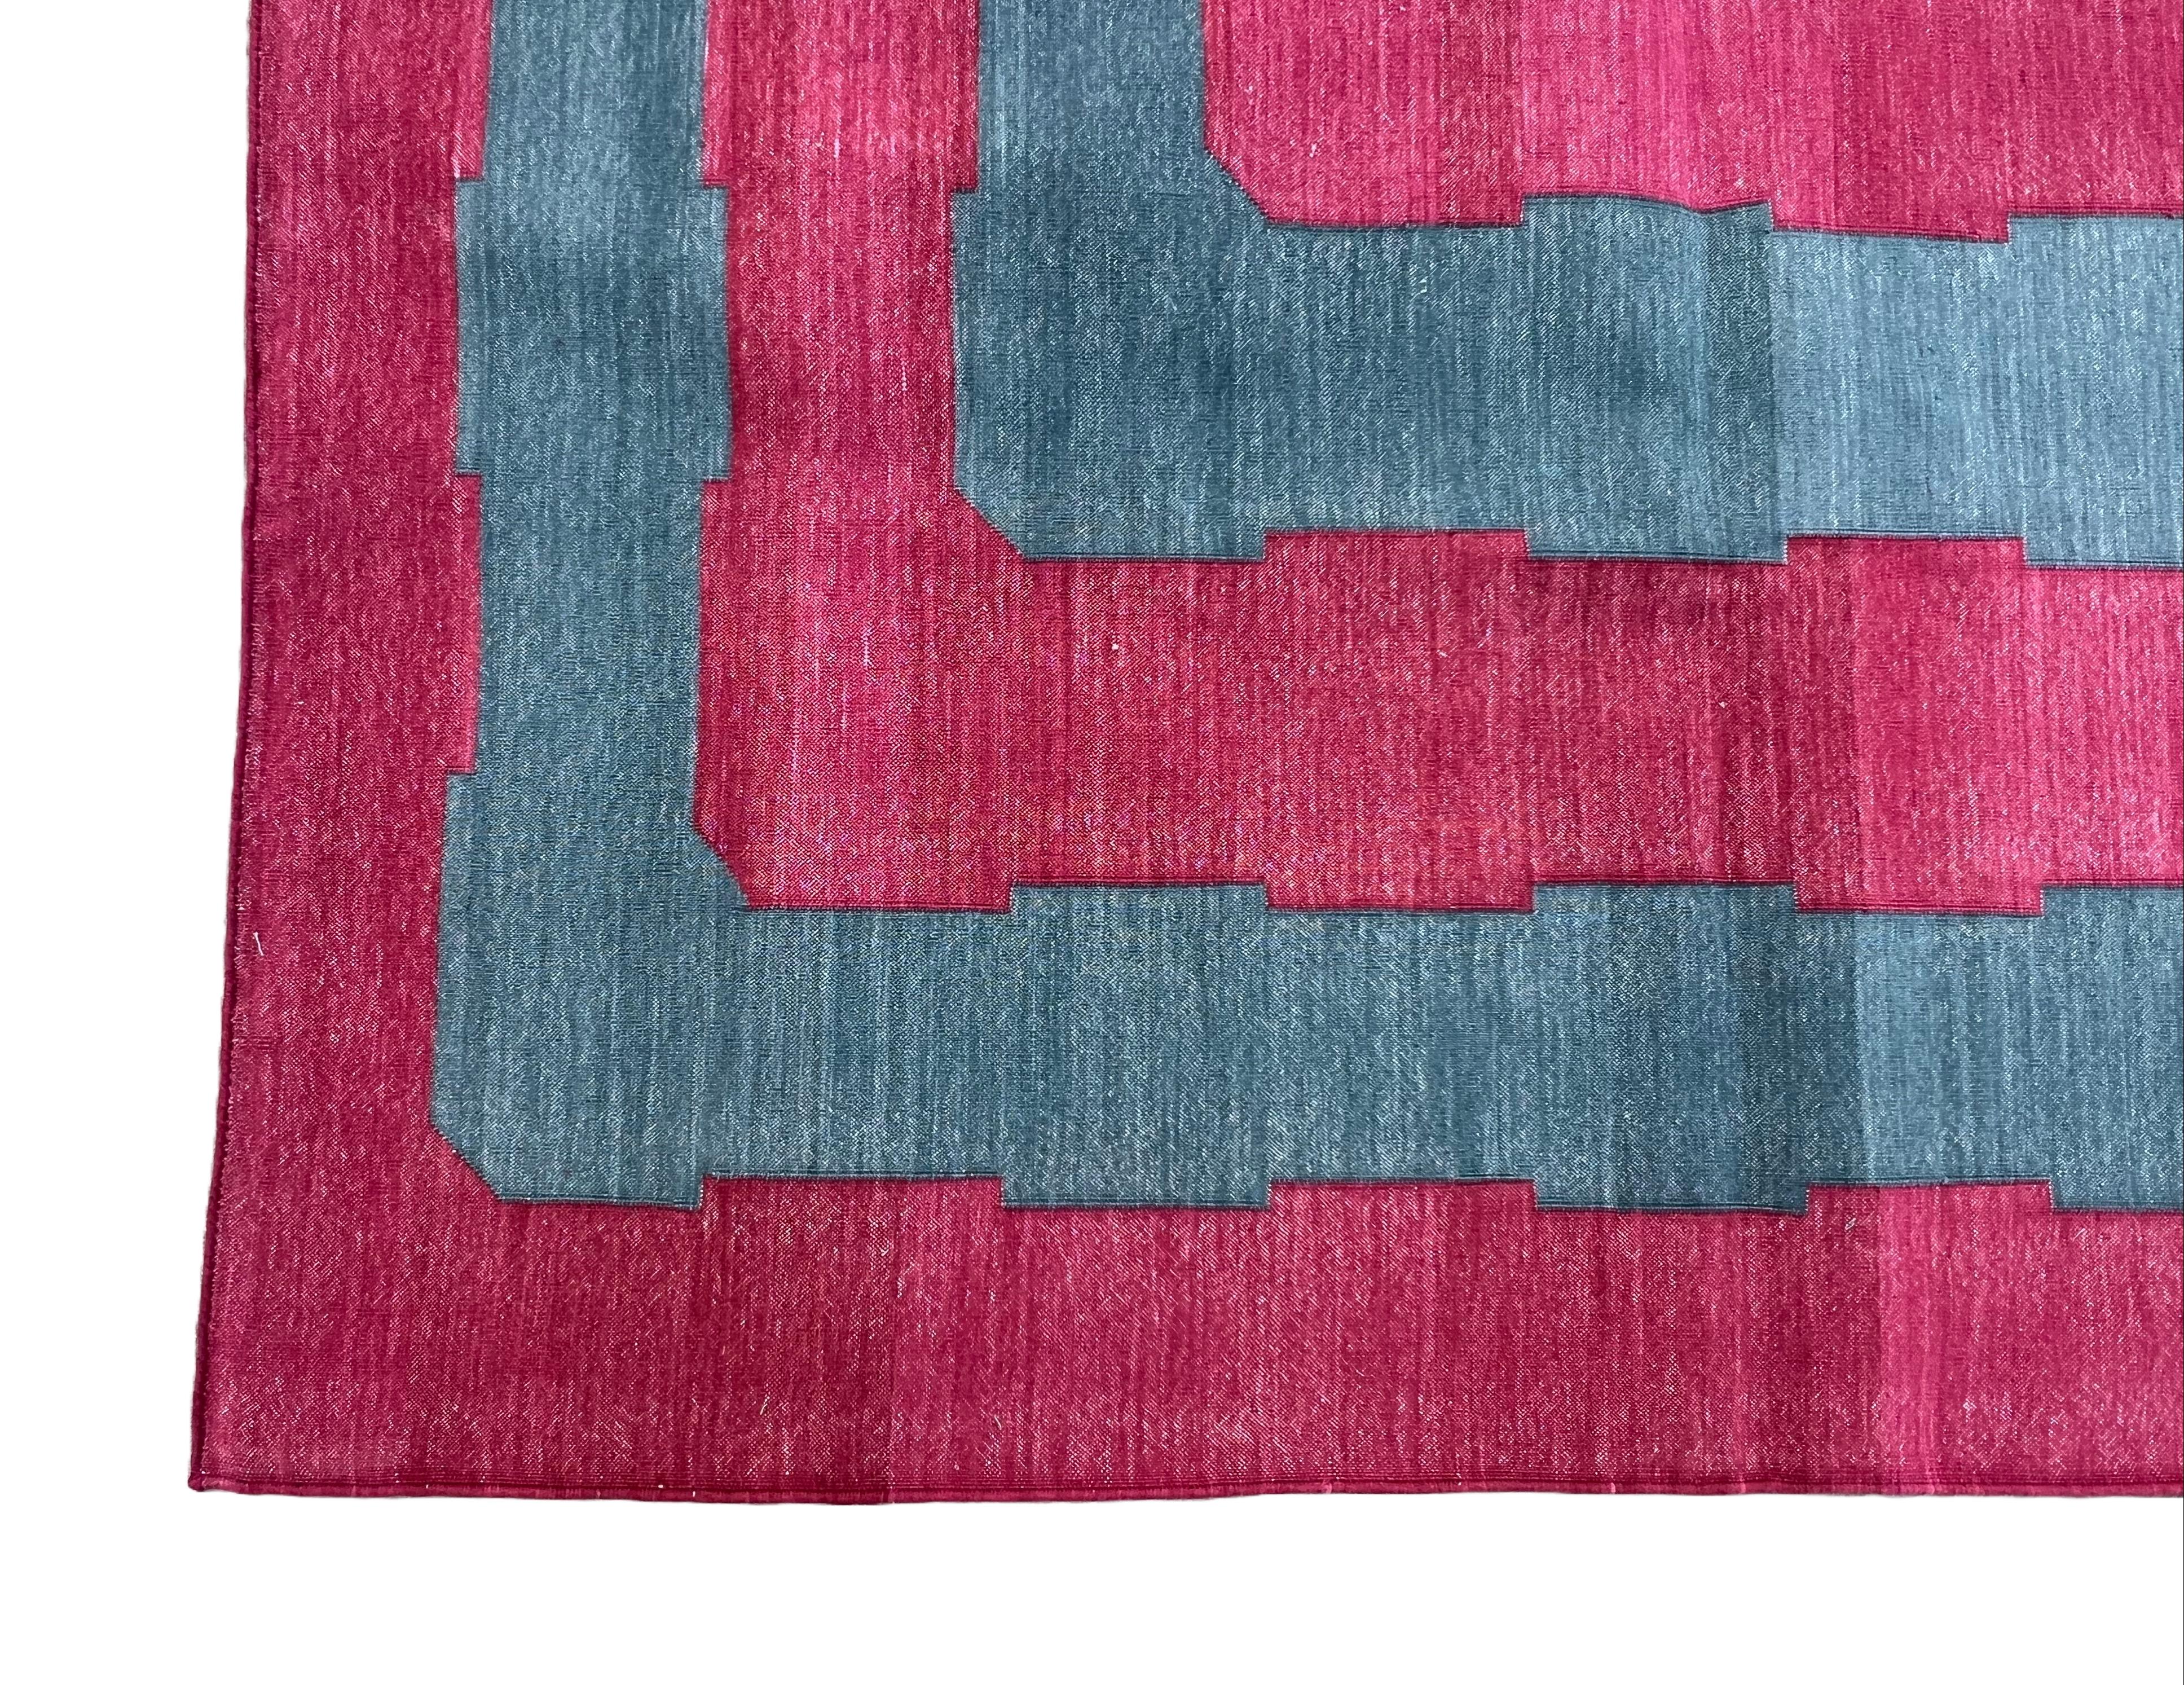 Hand-Woven Handmade Cotton Area Flat Weave Rug, 10x14 Blue And Pink Striped Indian Dhurrie For Sale